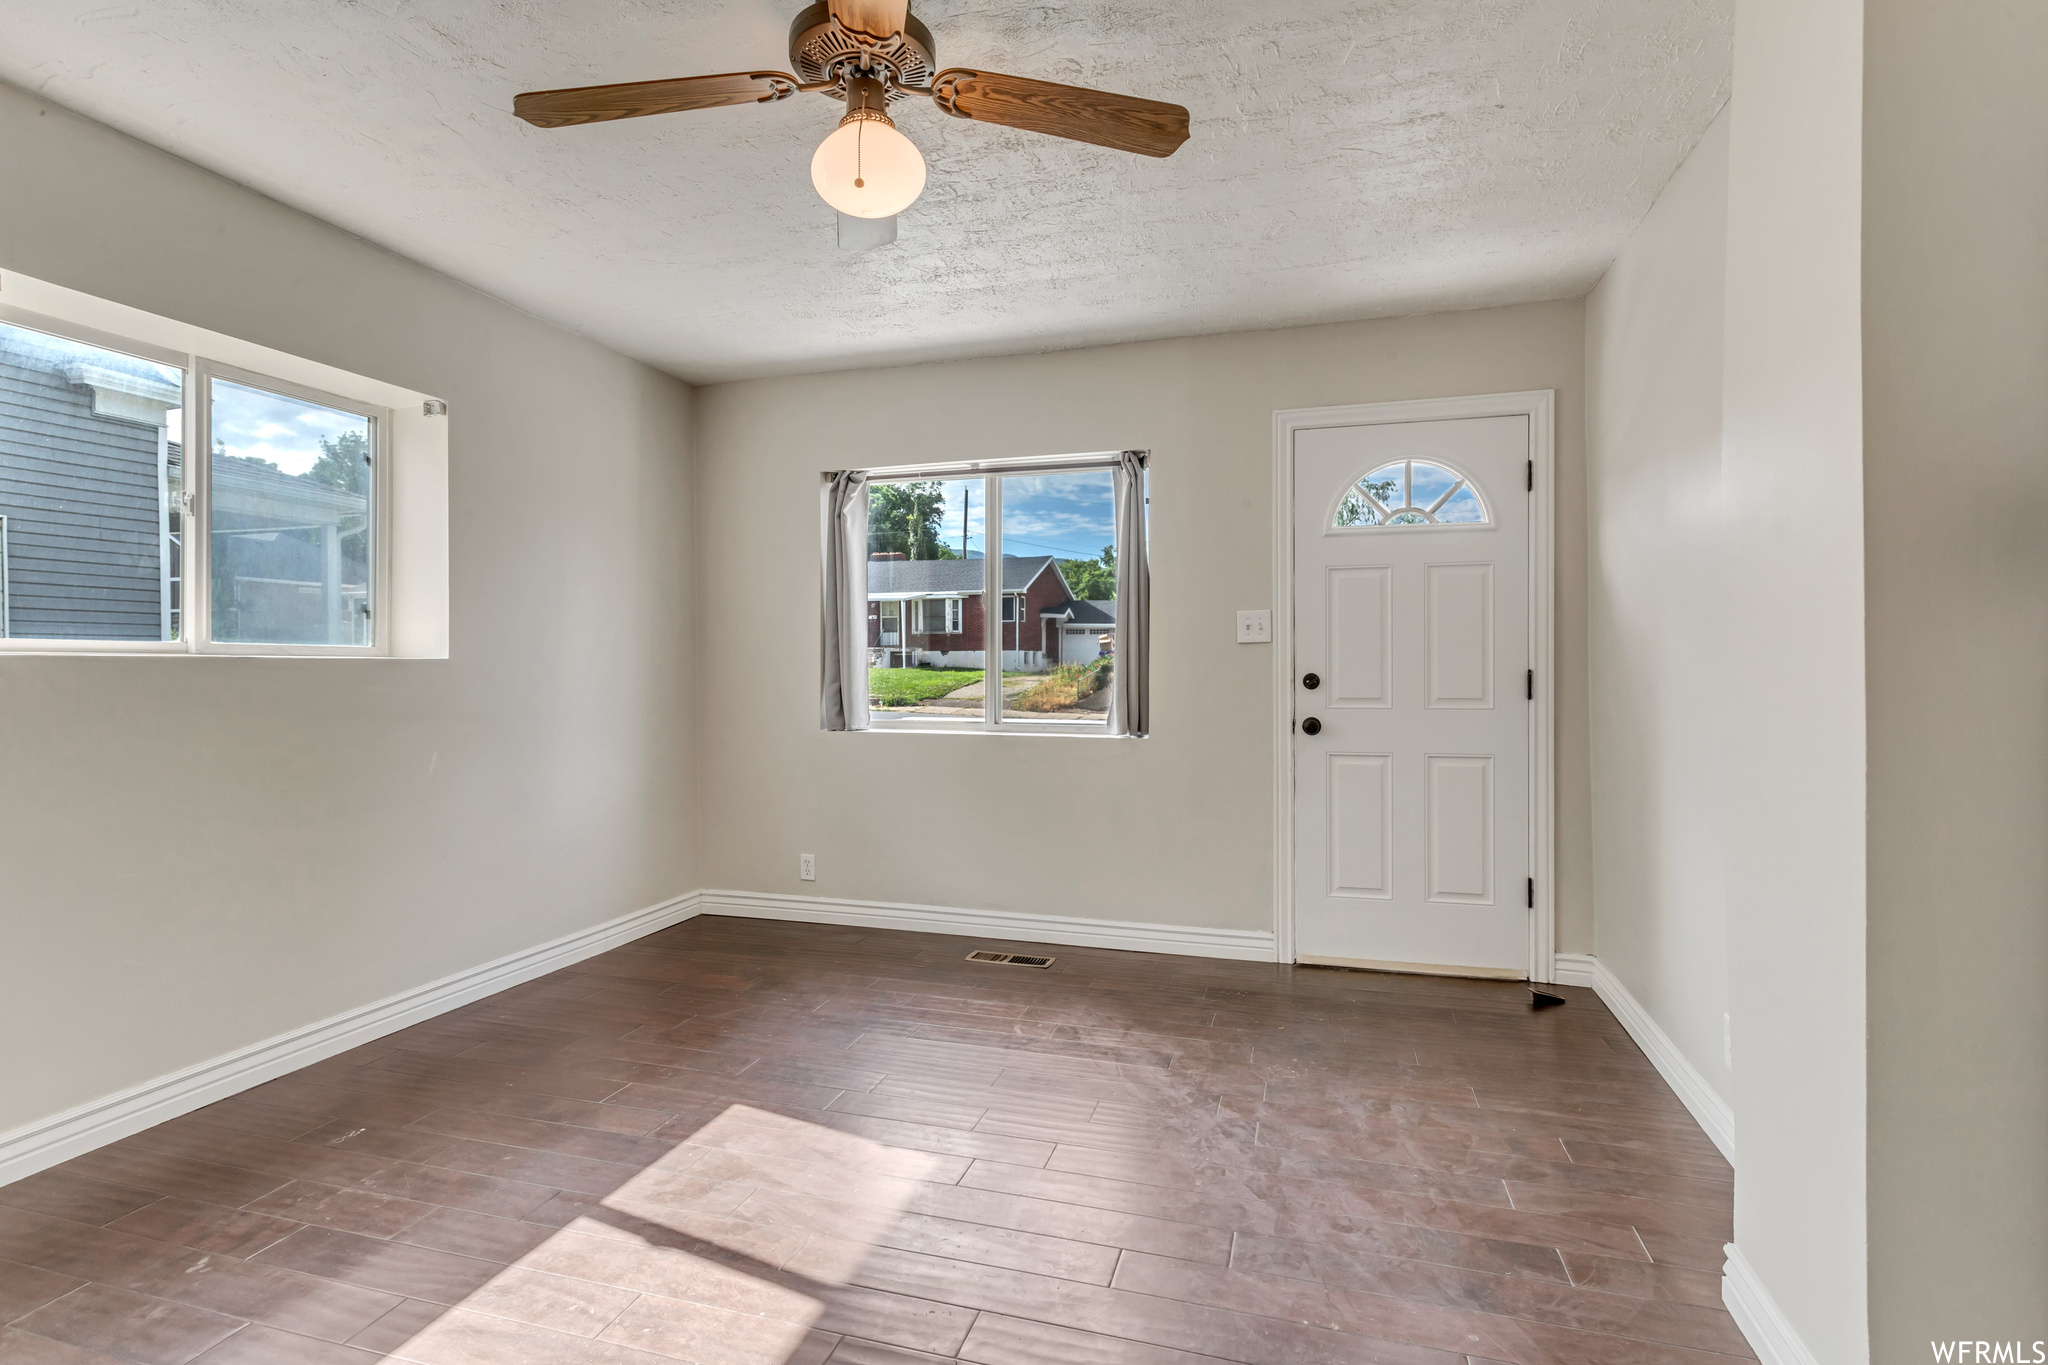 Foyer featuring ceiling fan and hardwood floors